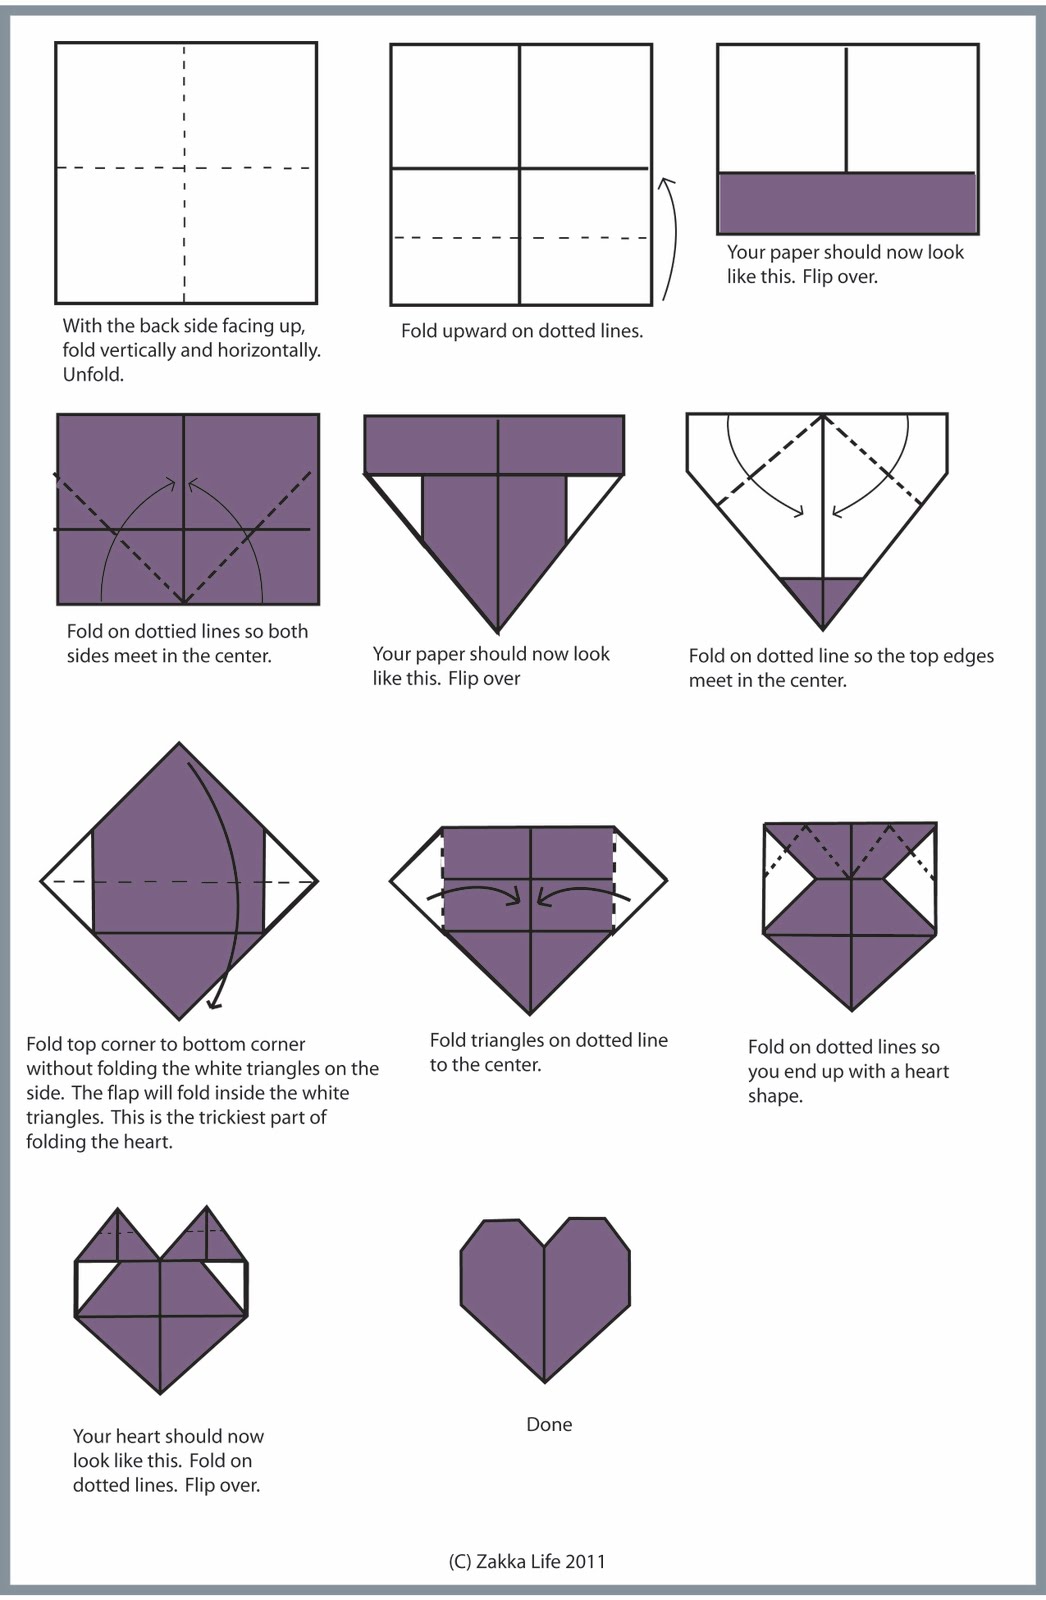 17 best ideas about origami hearts on pinterest | dollar 